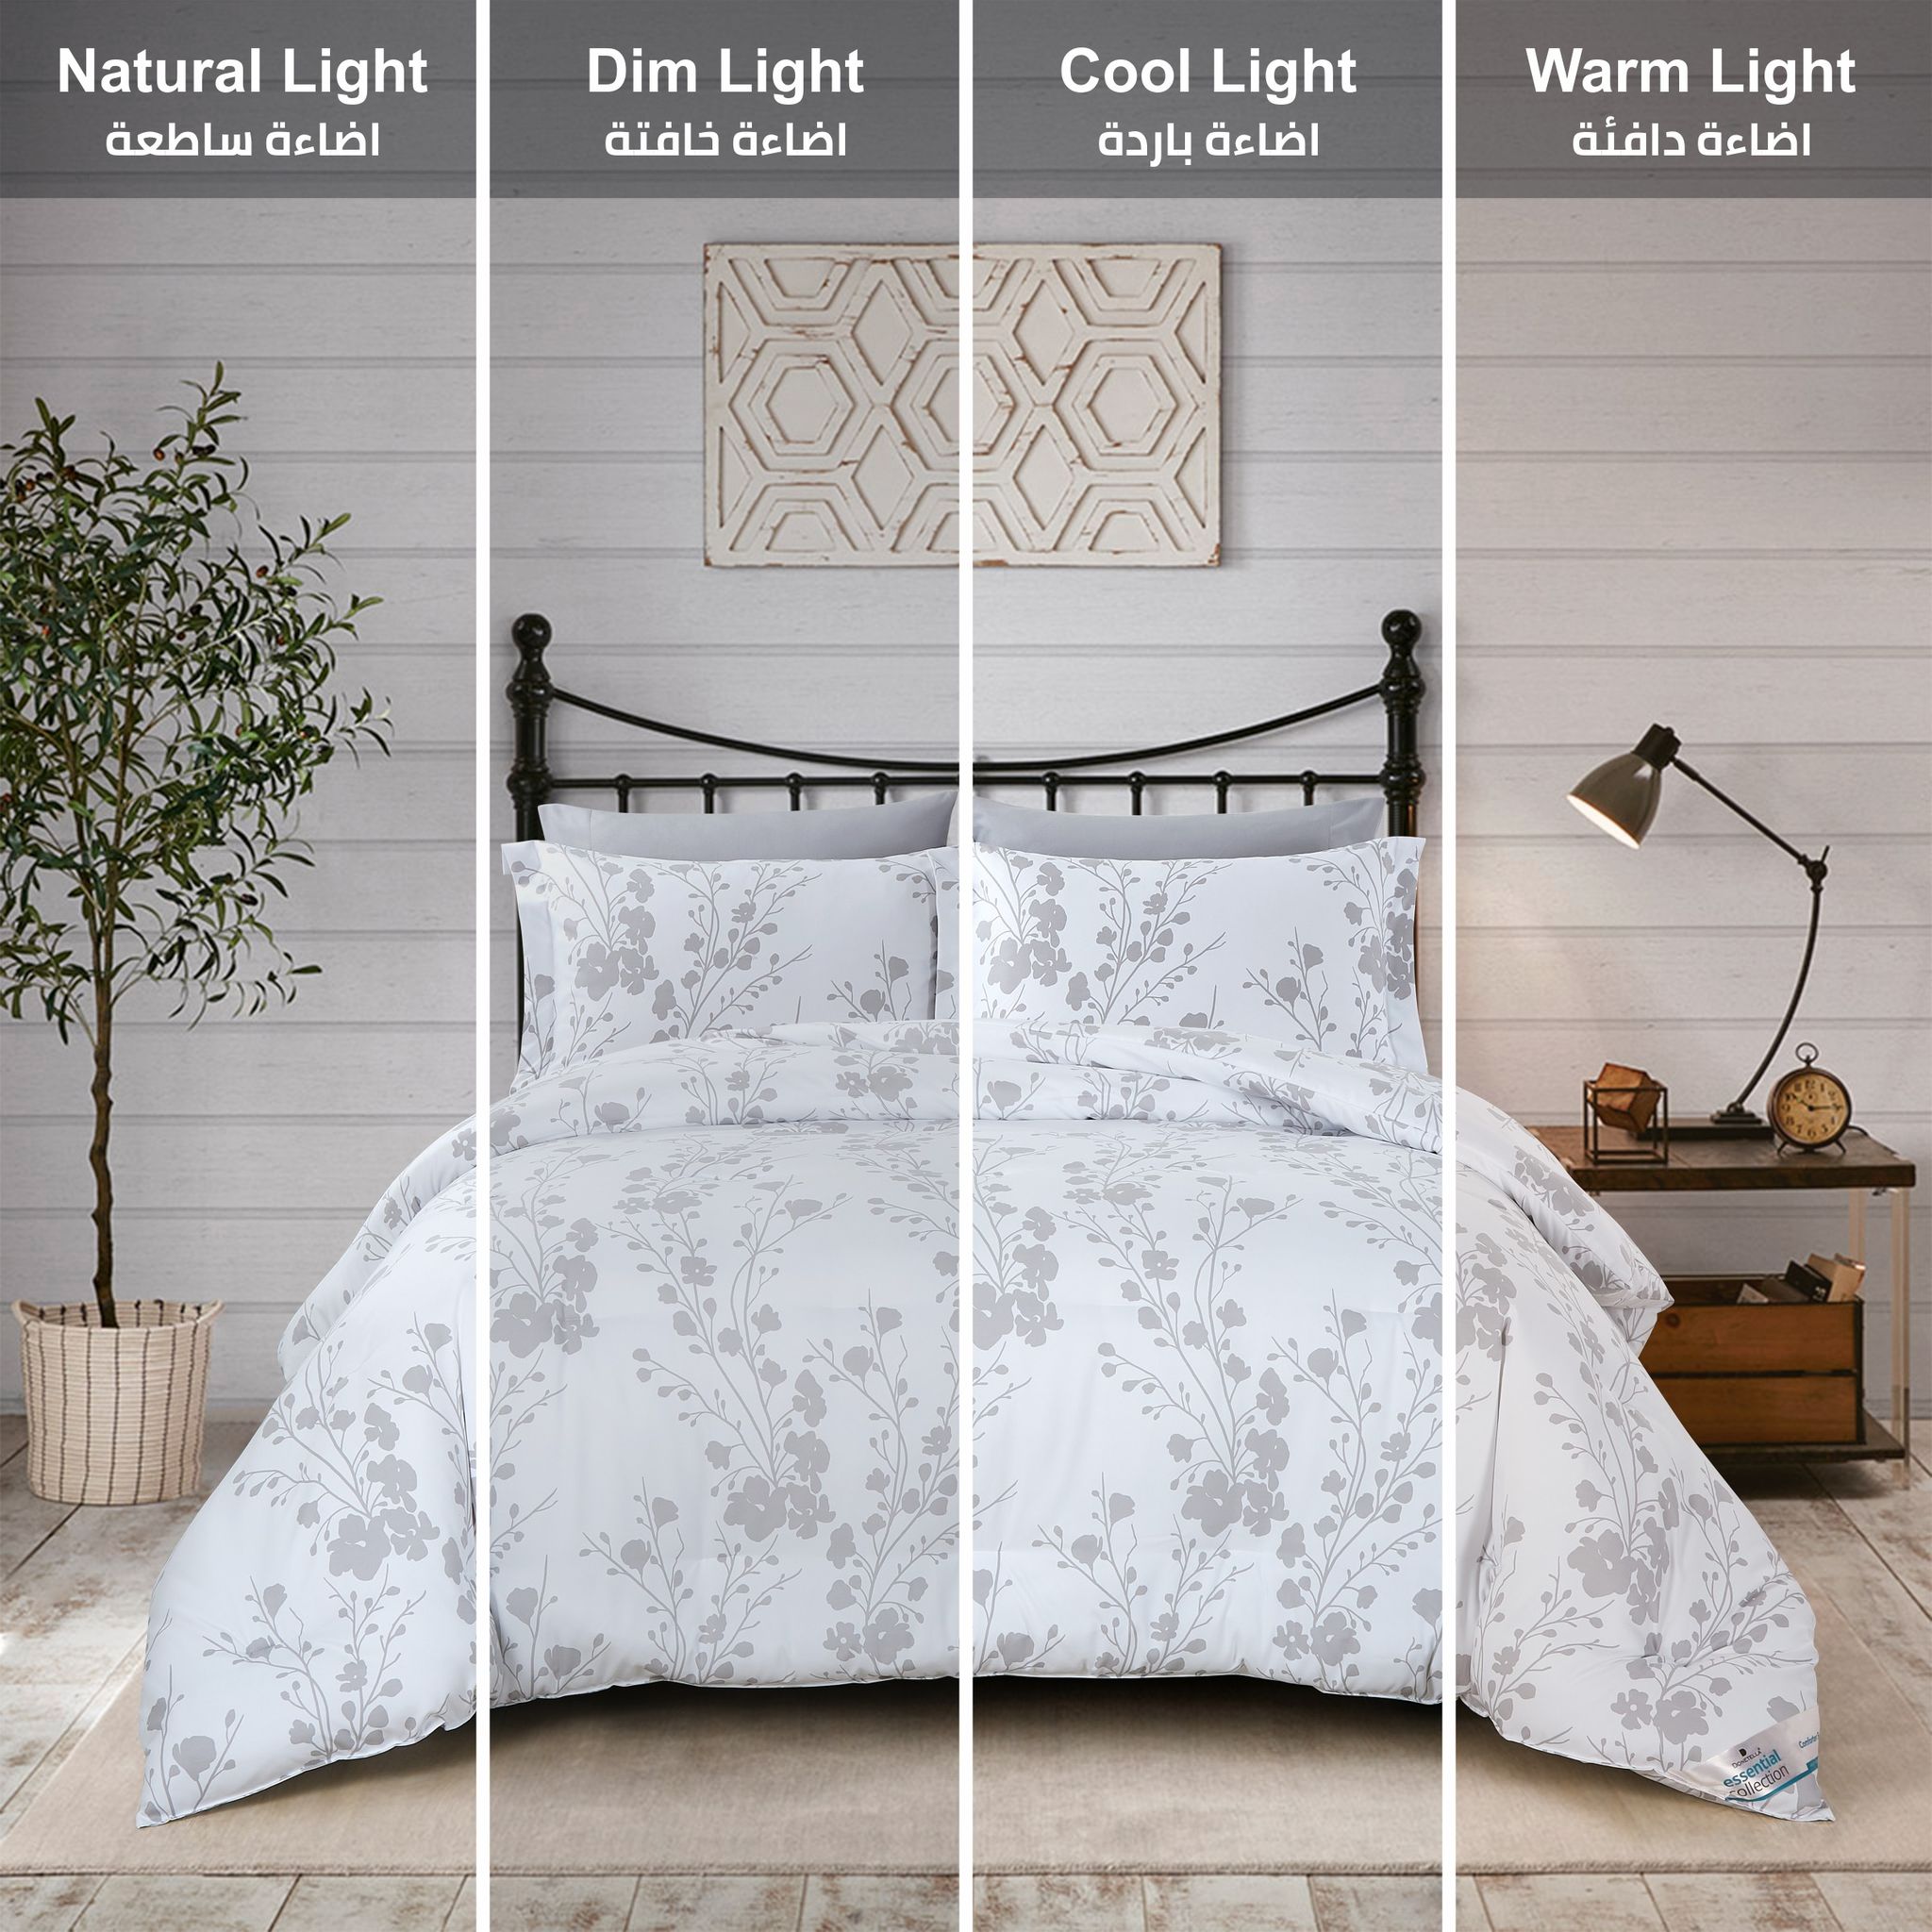 Printed Comforter Set 6-Pcs King Size Lightweight All Season Double Bed Bedding Set With Down Alternative Filling,White Silver